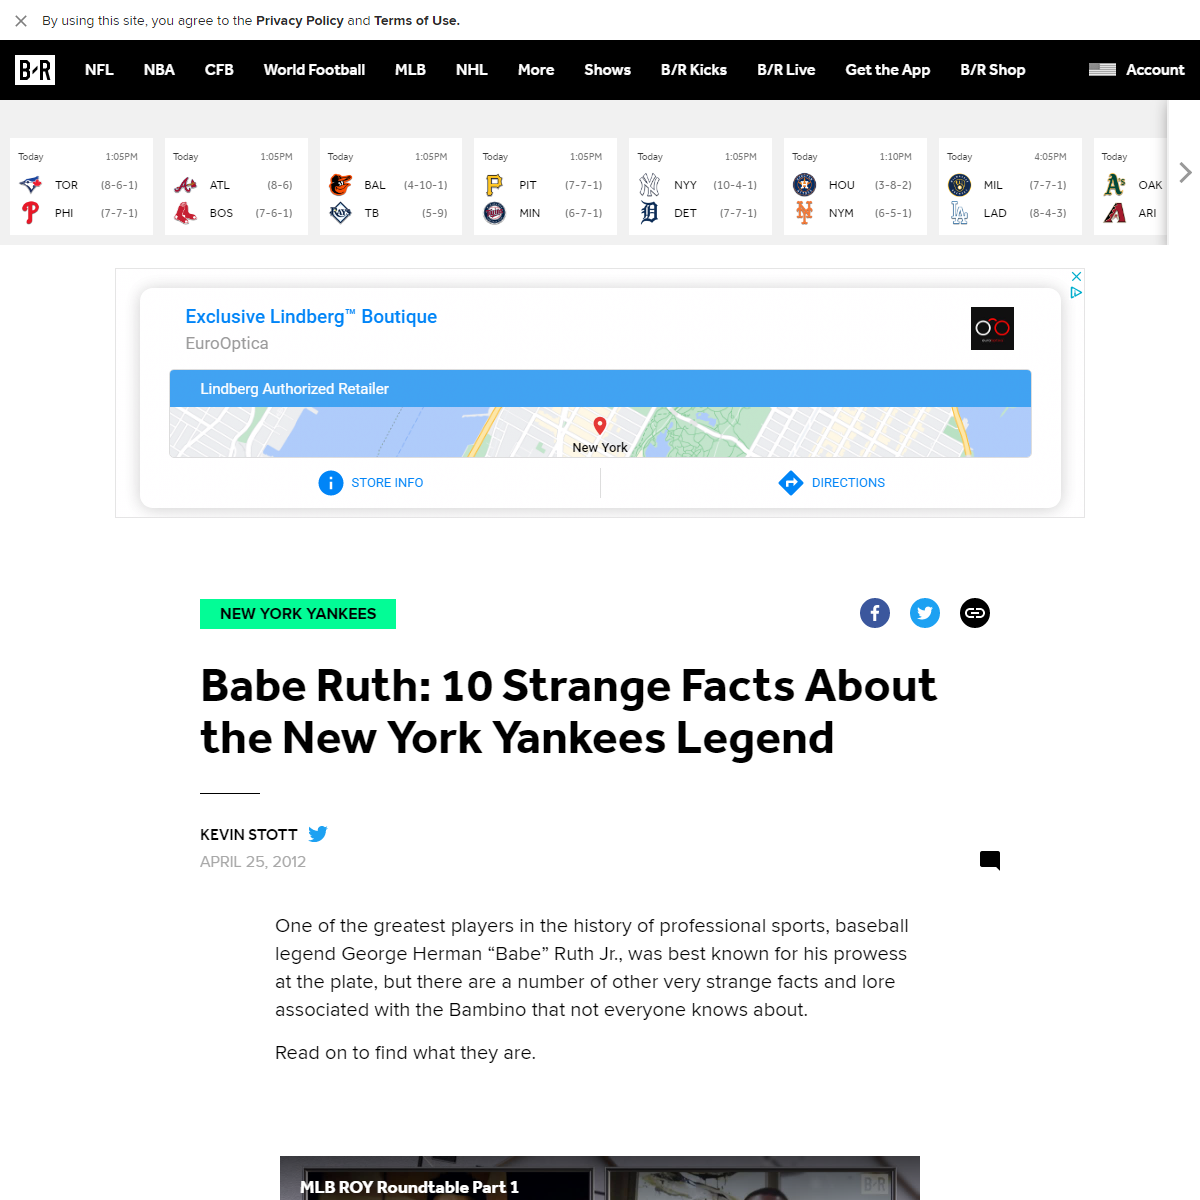 A complete backup of https://bleacherreport.com/articles/1159341-babe-ruth-10-strange-facts-about-the-new-york-yankees-legend